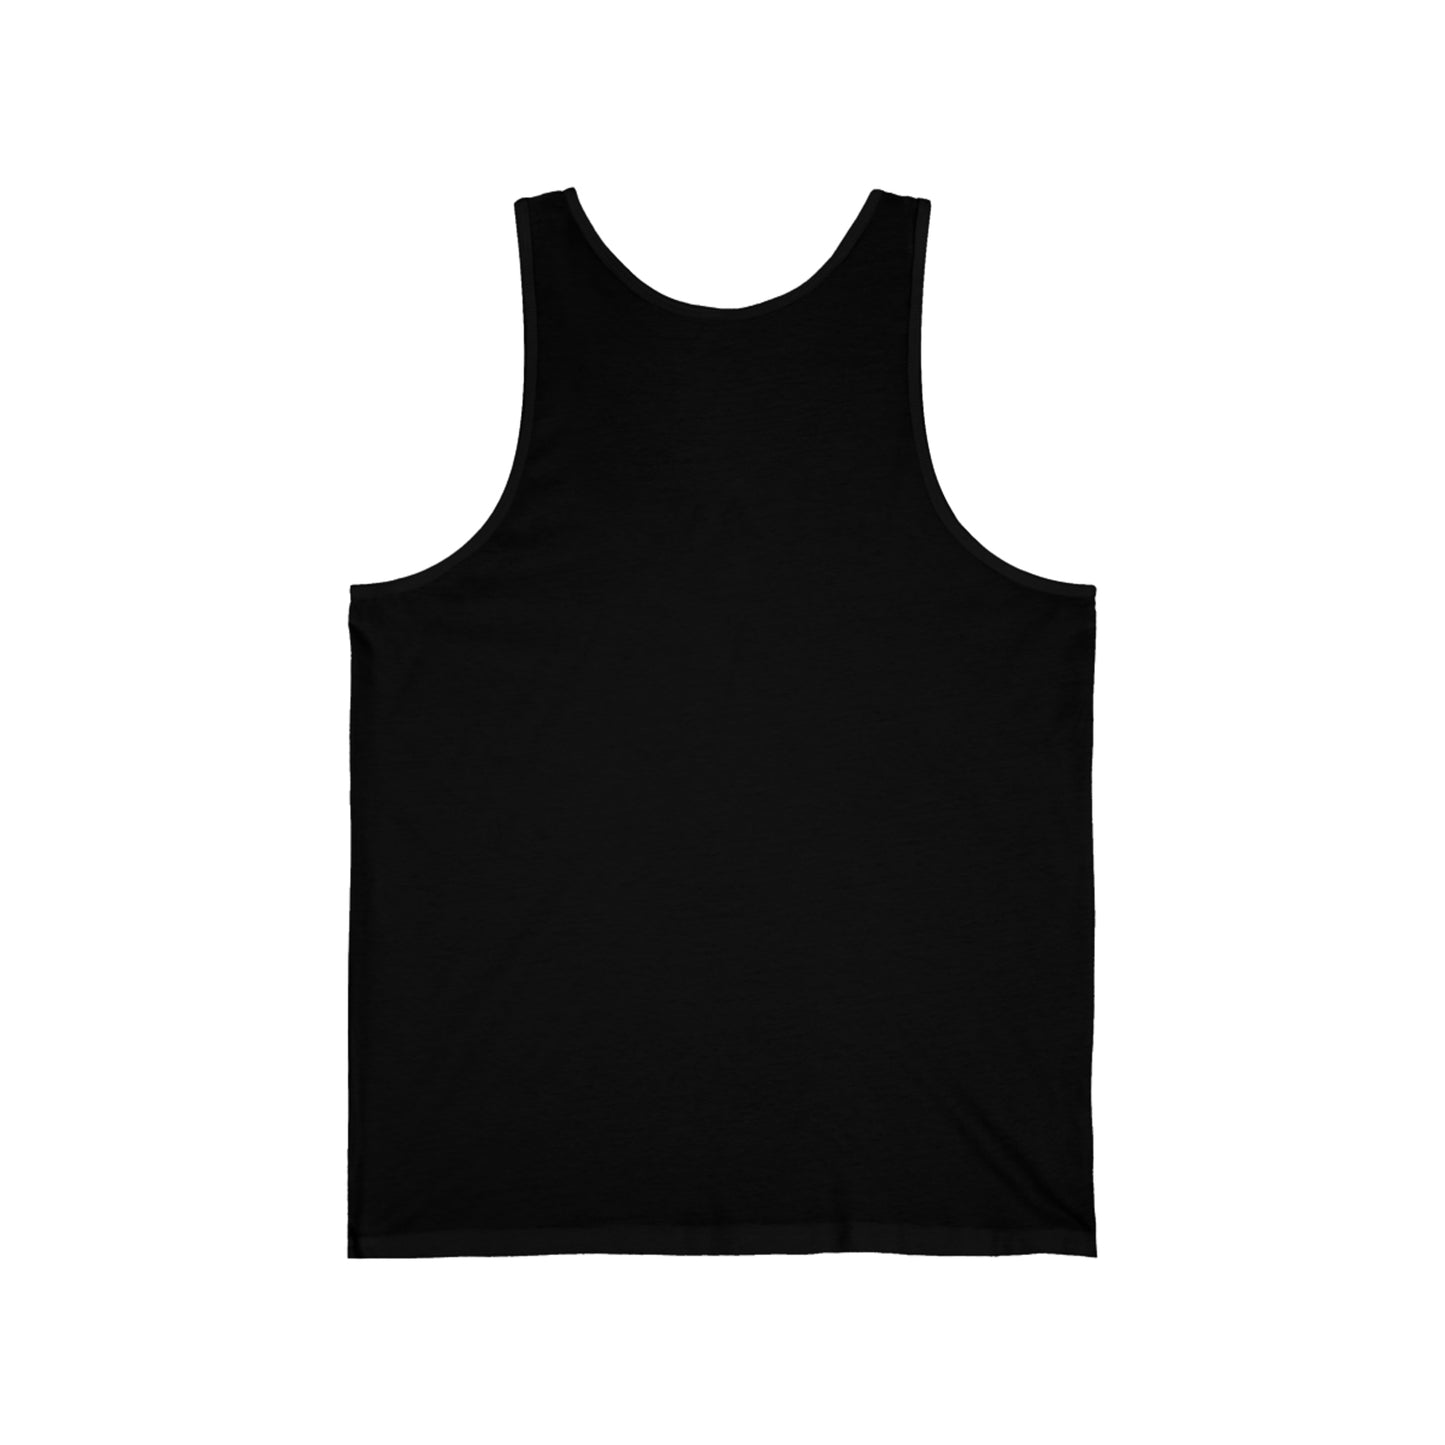 Palestinian Roots Design 4: Tank Top